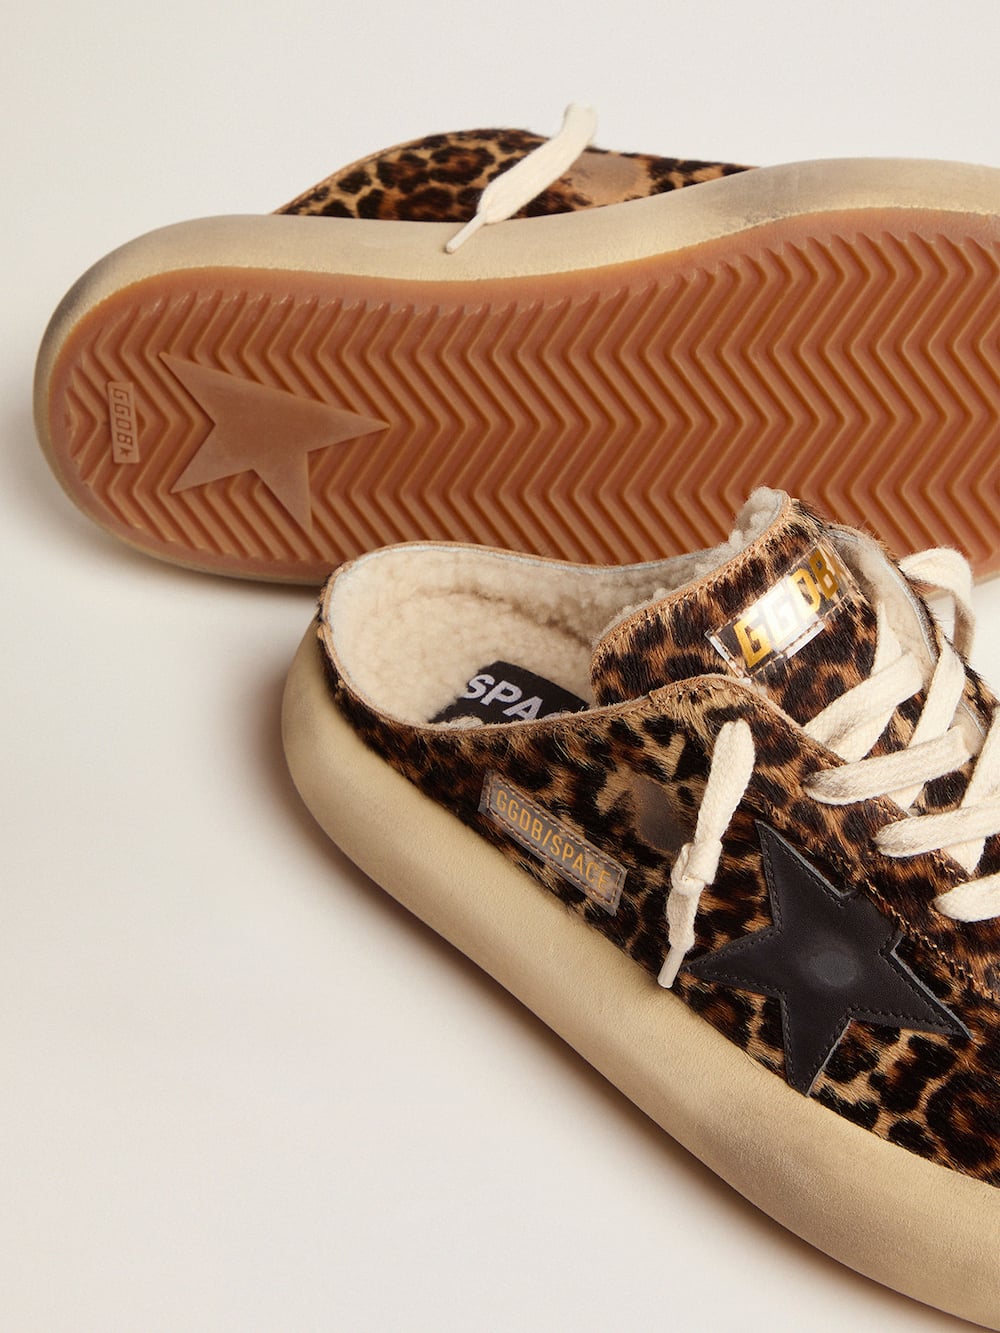 Golden Goose - Women's Space-Star Sabot in animal print pony skin and shearling lining in 